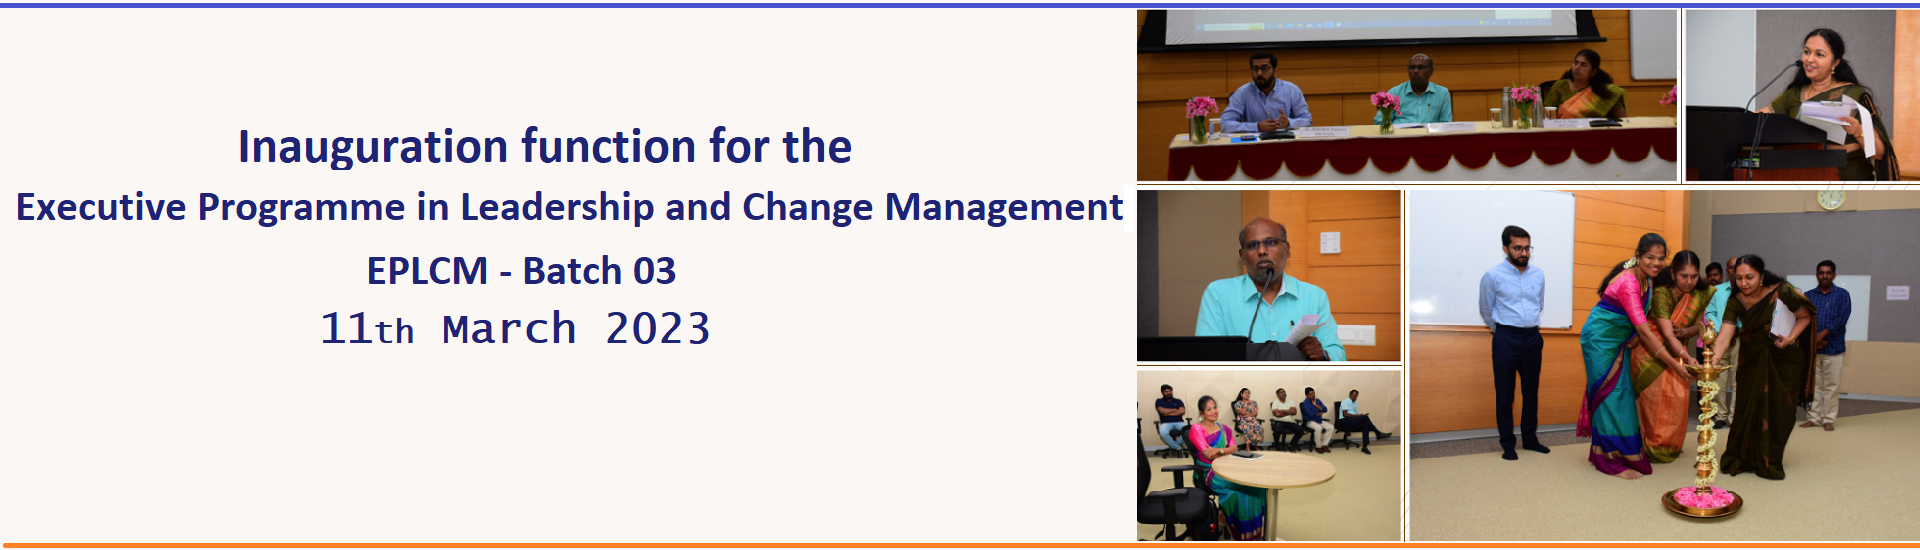 Inauguration function for the Executive Programme in Leadership and Change Management - EPLCM Batch 03